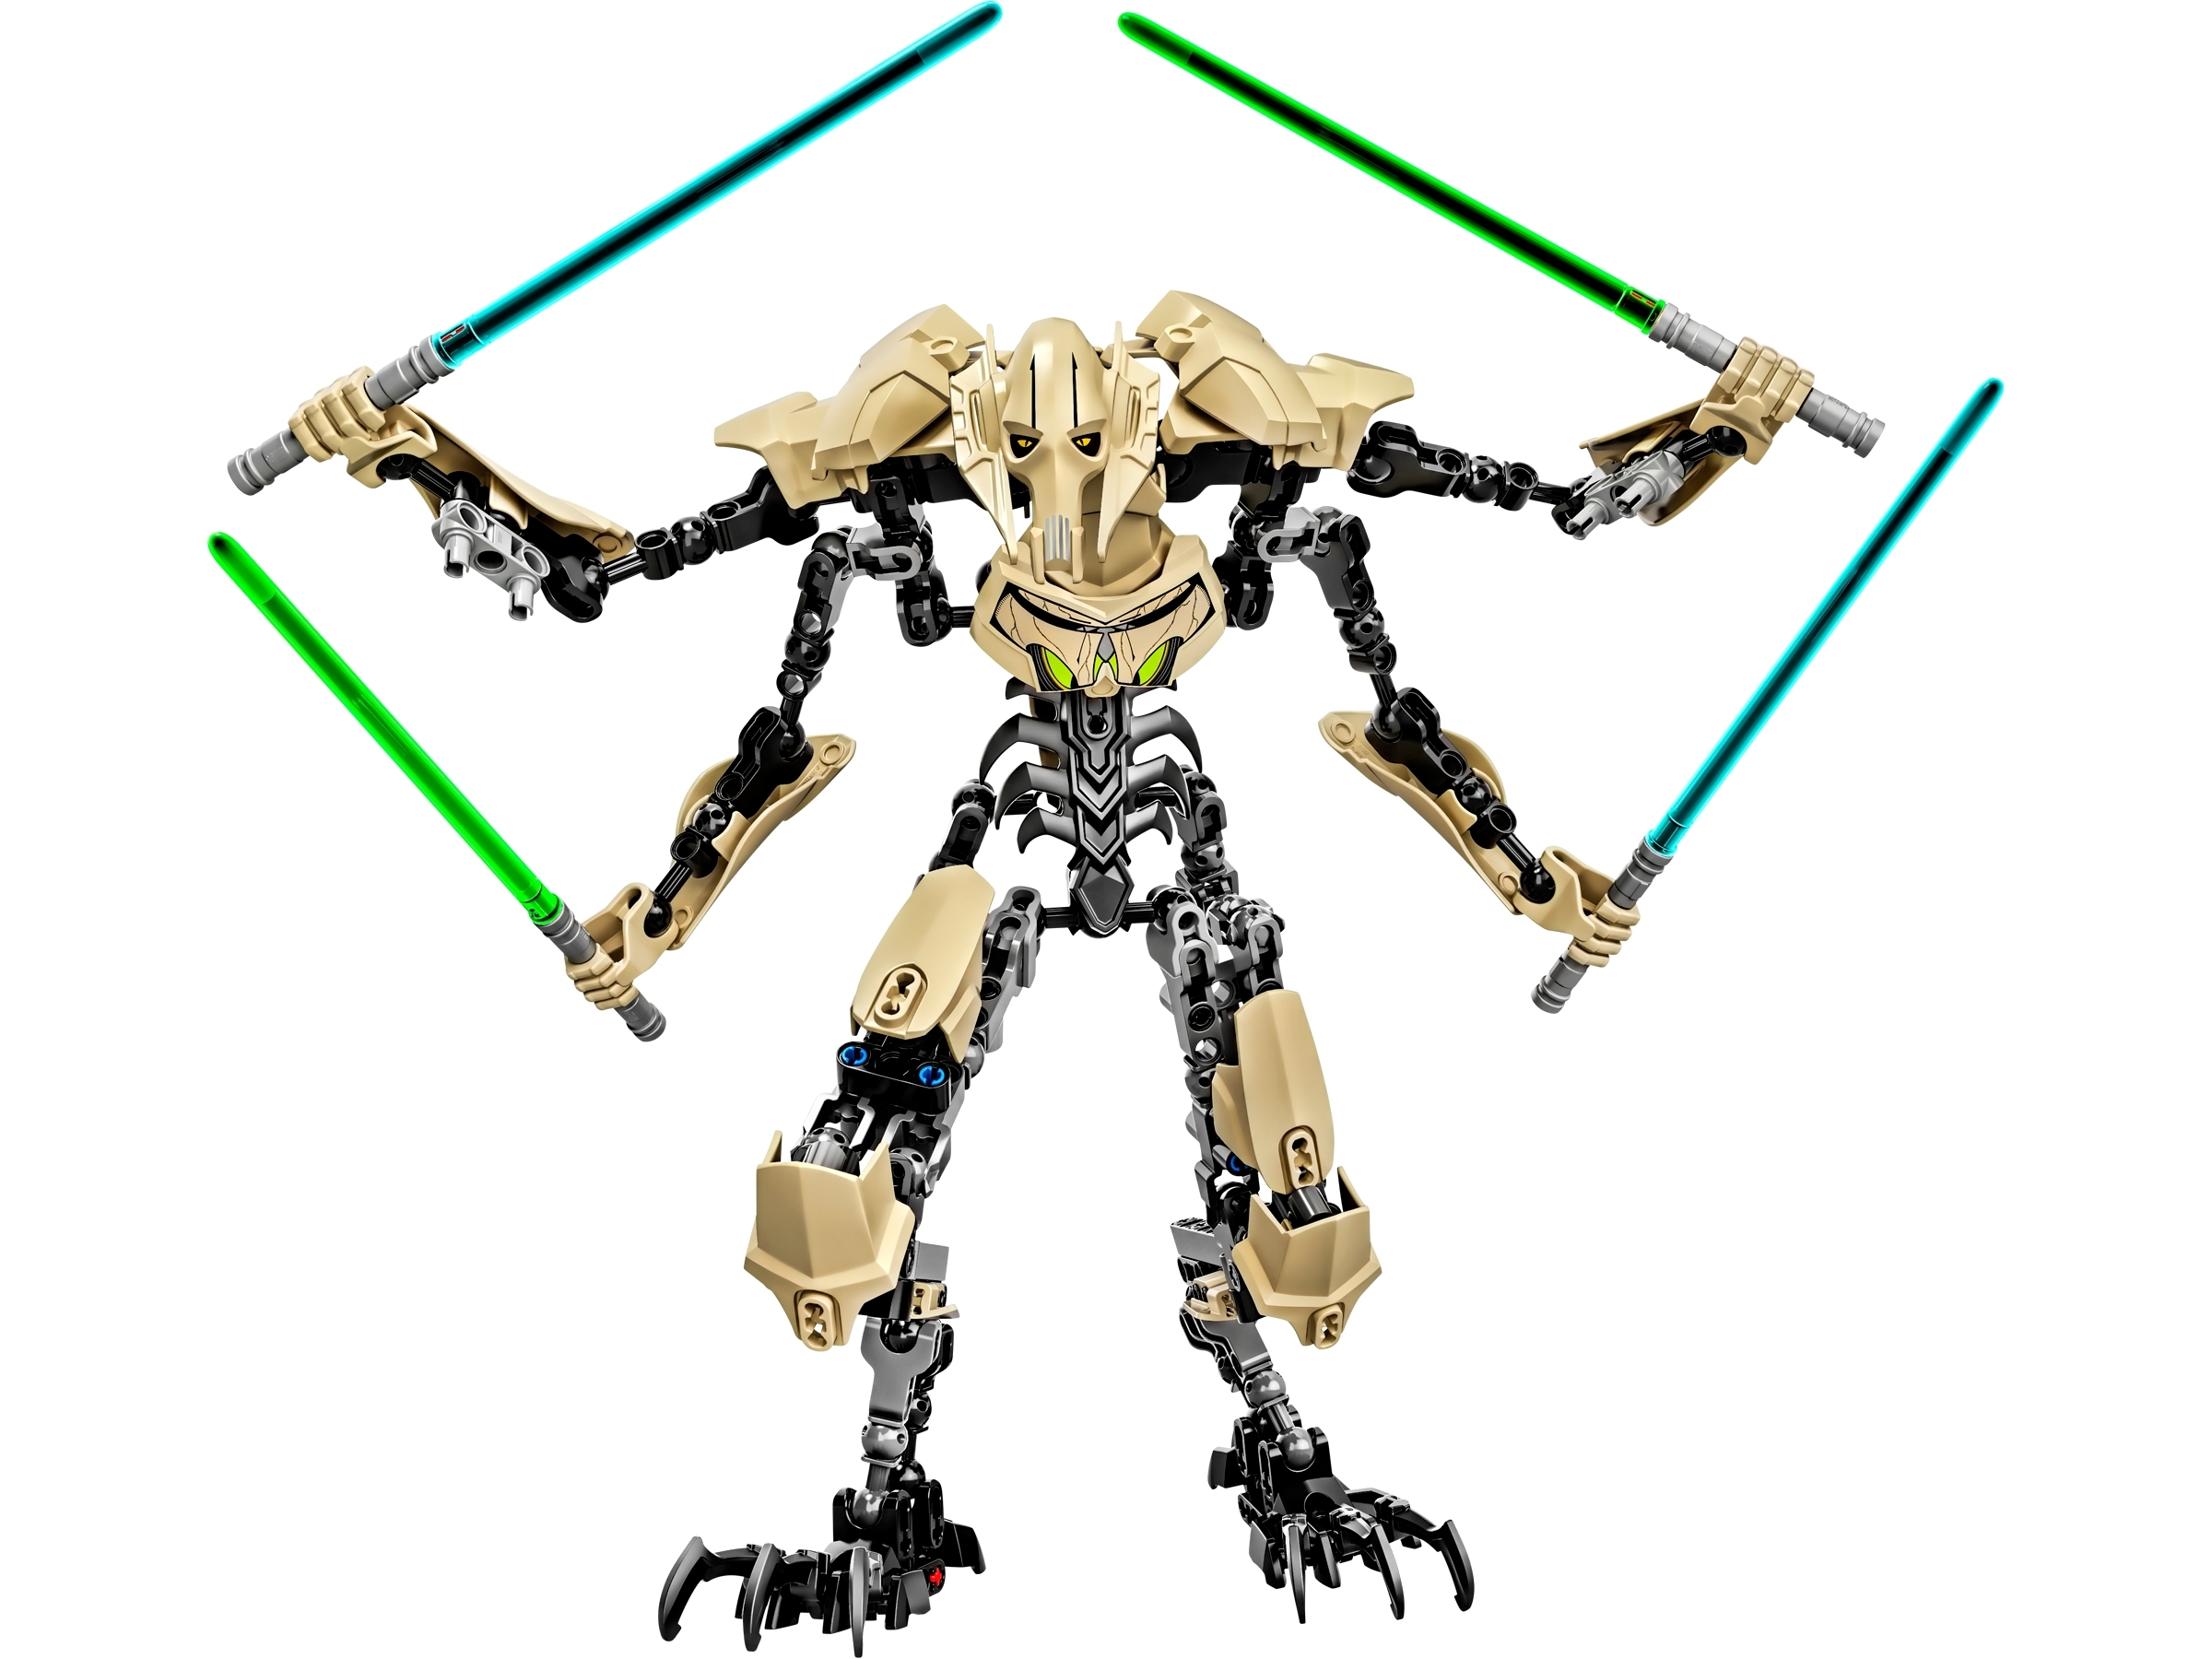 New toy building blocks Star Wars General Grievous Buildable Figure Without Box 